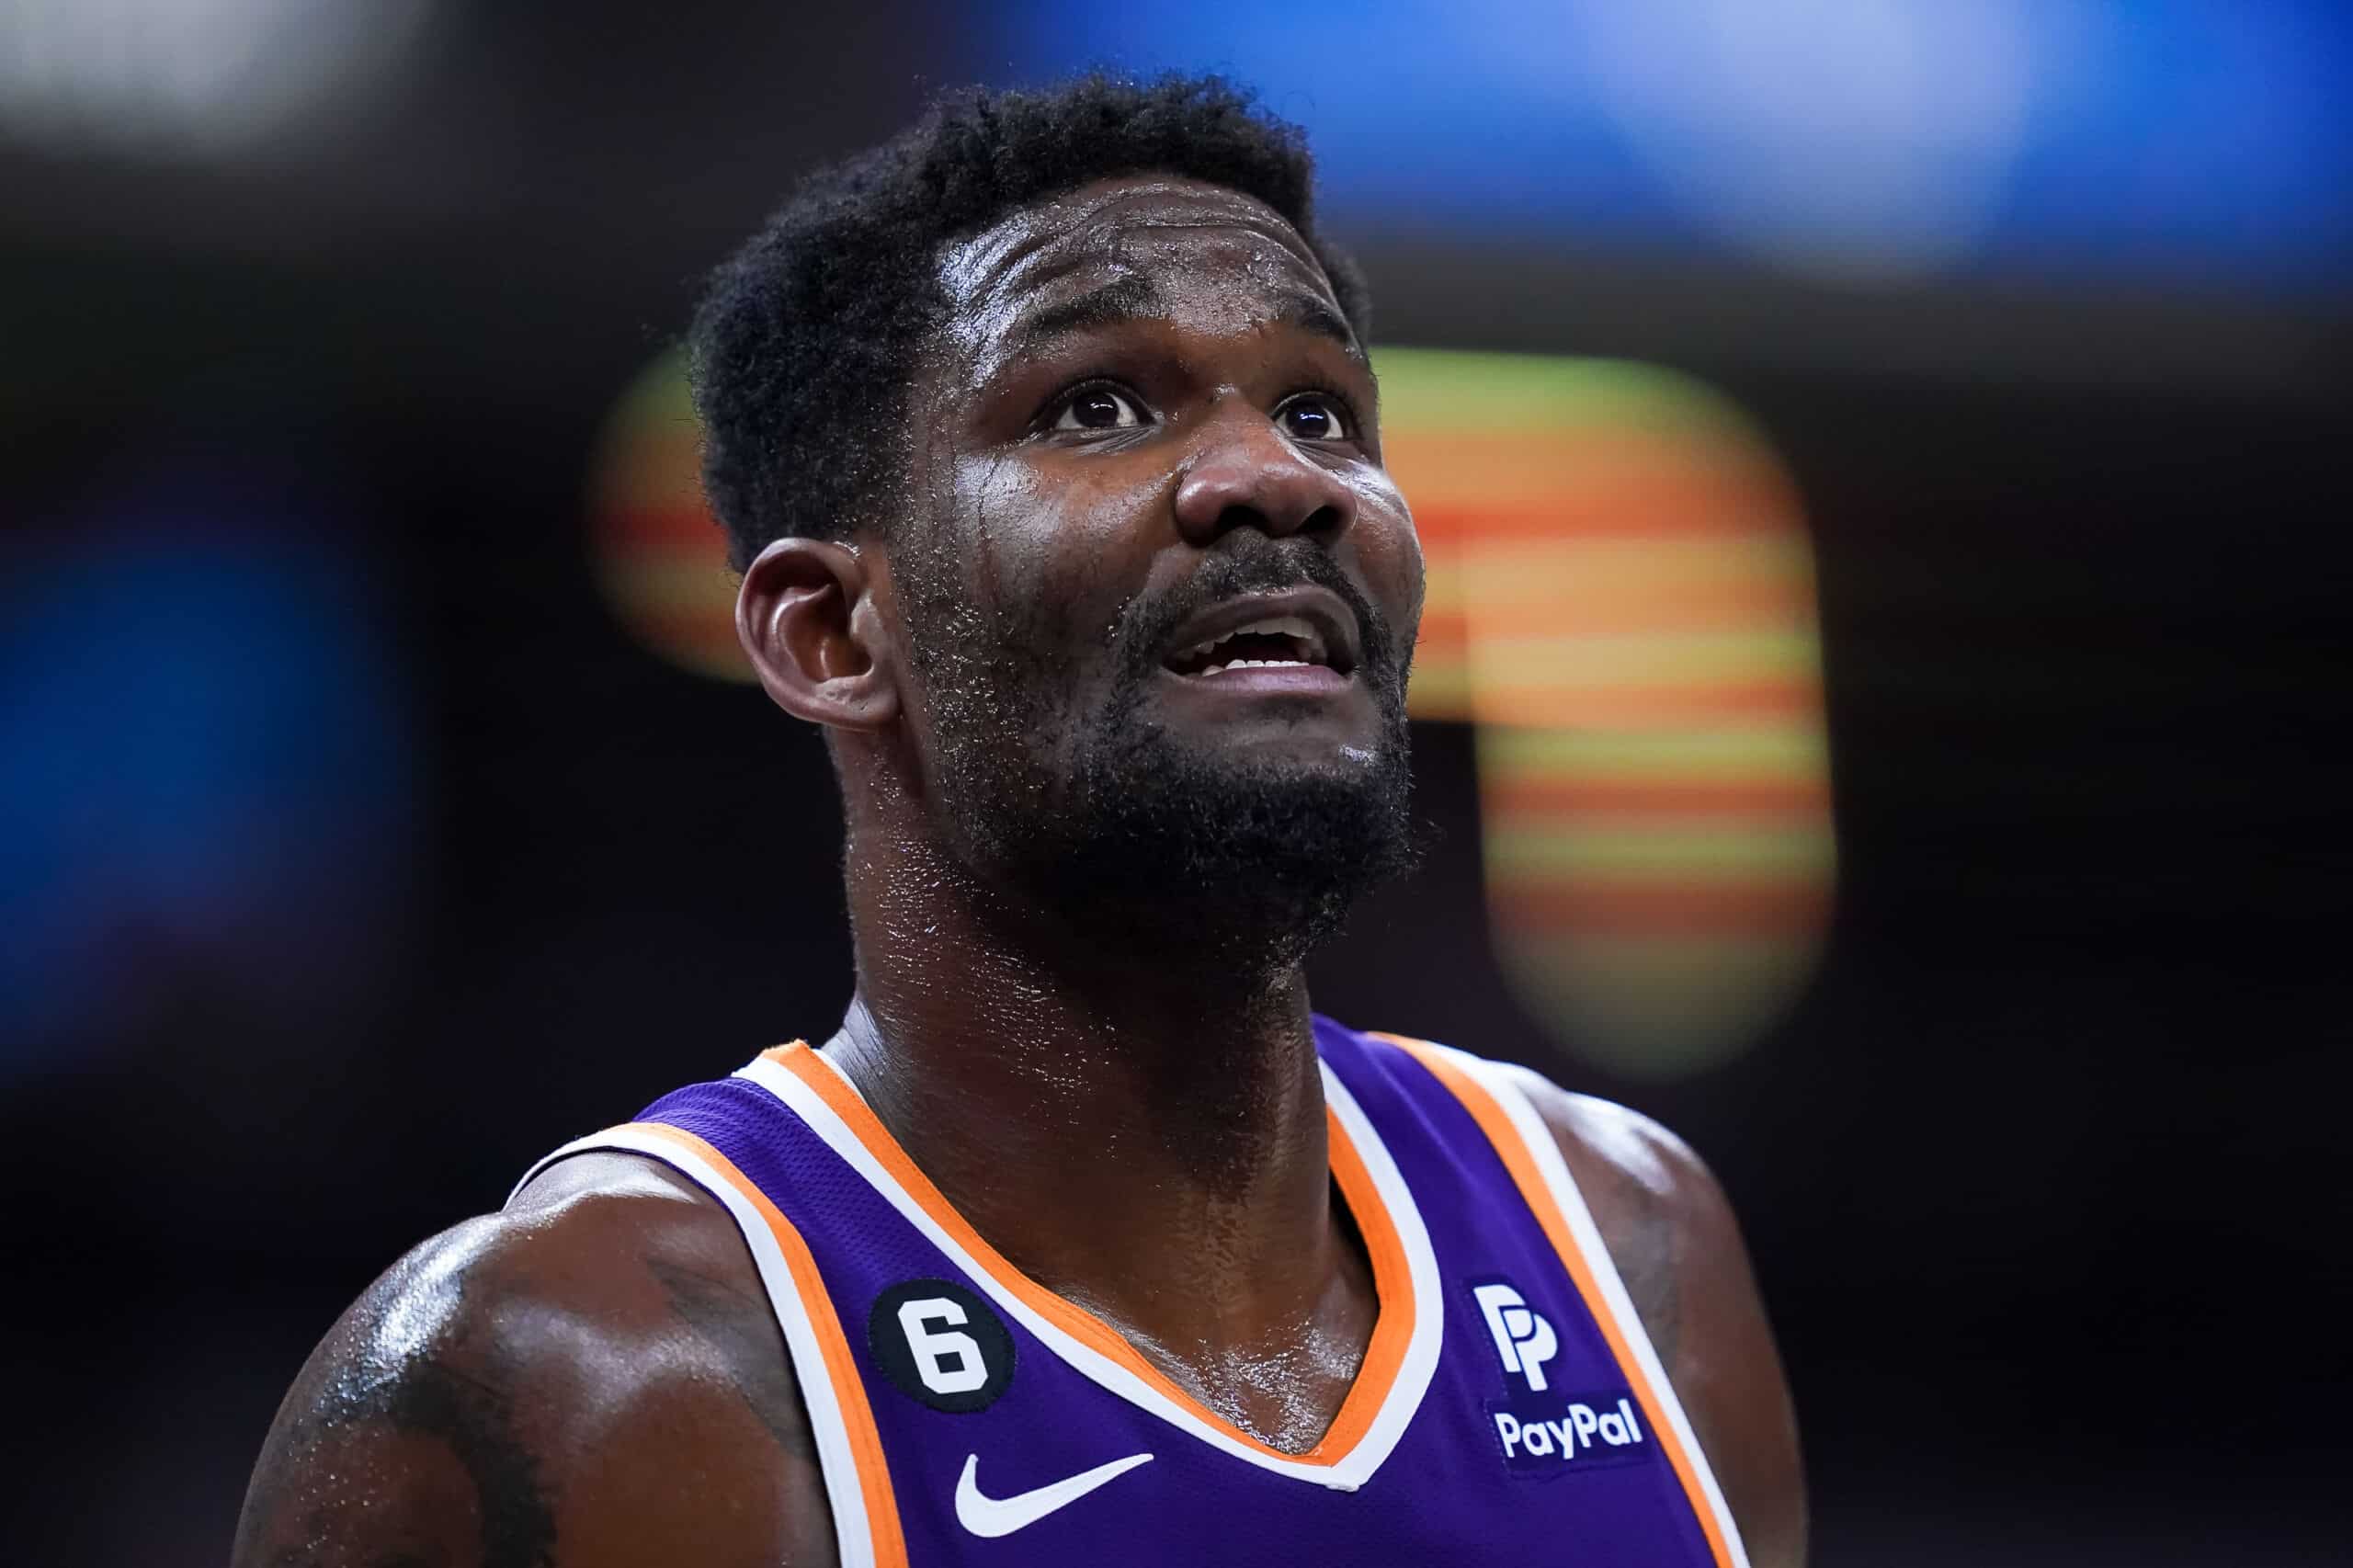 Deandre Ayton: I Can Feel The Whole World Hating Me